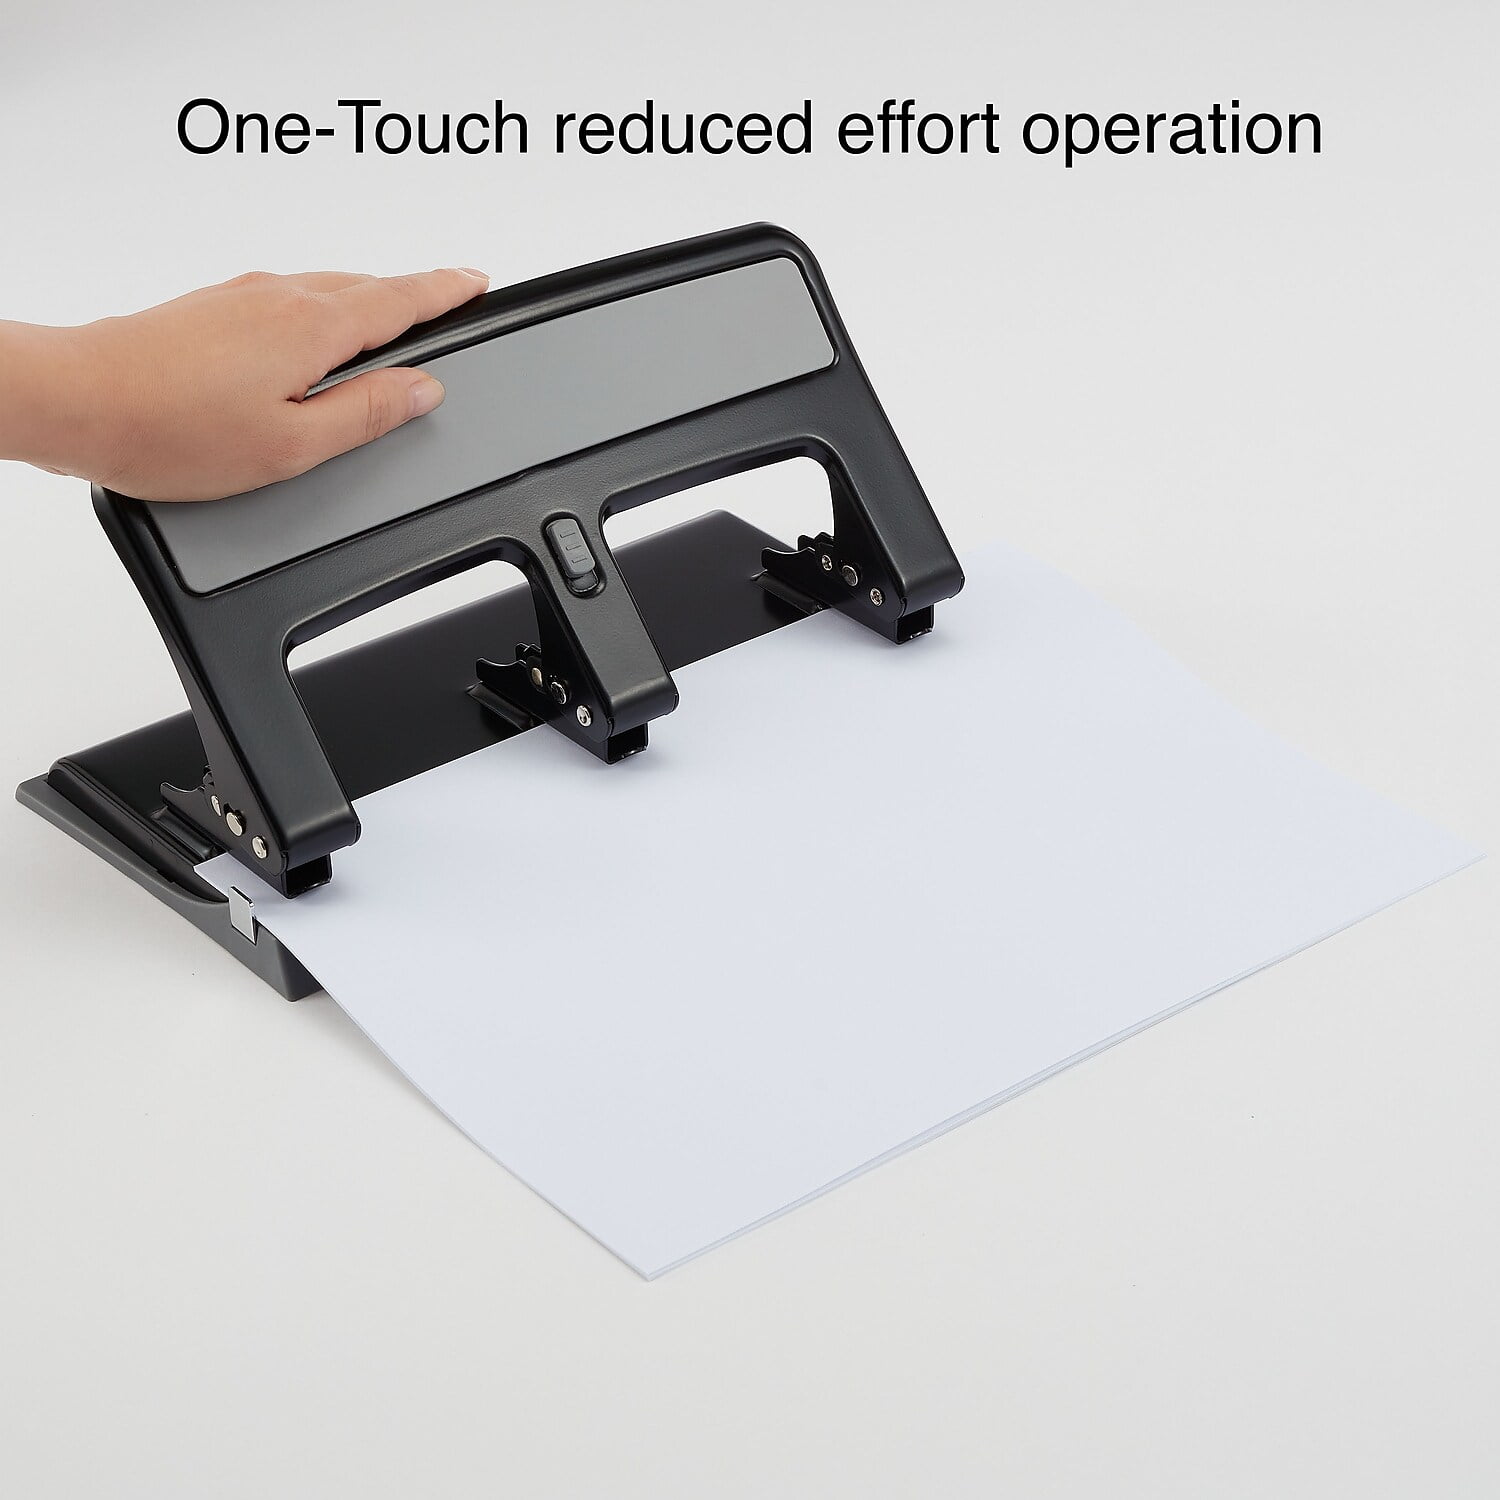 Staples One-Touch 3-Hole Punch, 30 Sheet Capacity, Black, 6/Case (26614) -  Yahoo Shopping